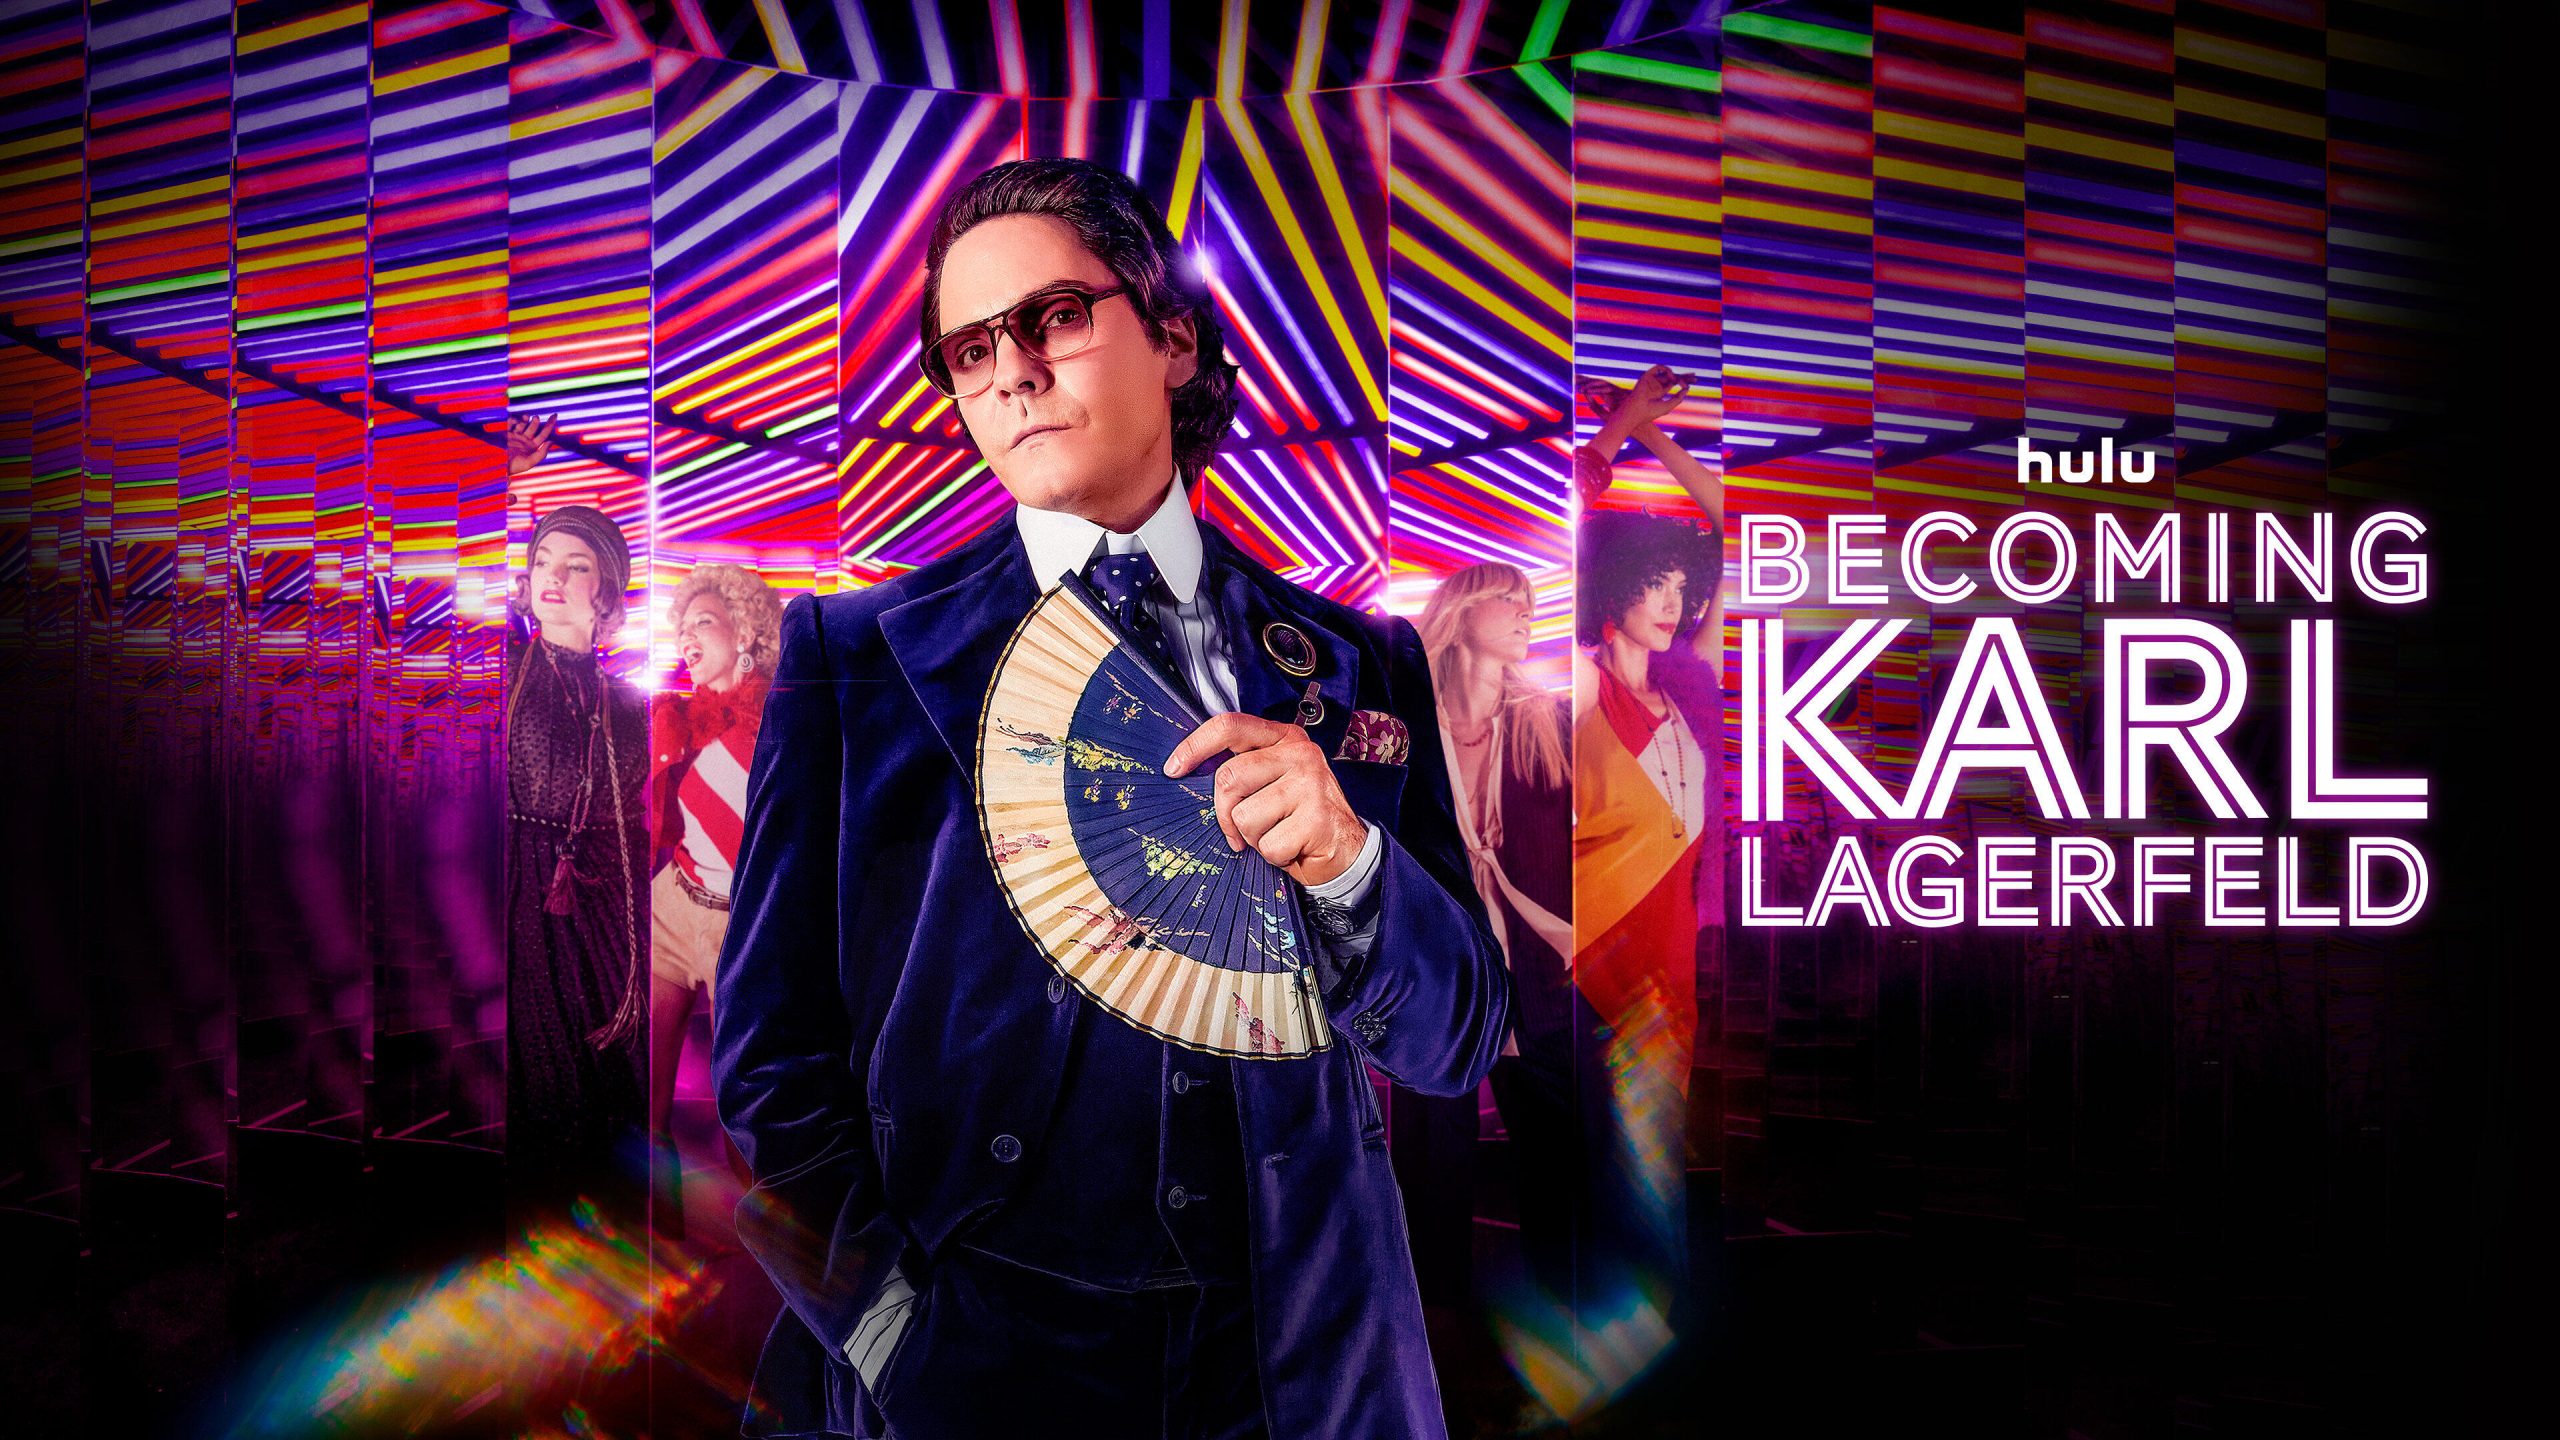 Becoming Karl Lagerfeld -- Season 1 -- In 1972, Karl Lagerfeld (Daniel Brühl) is 38 and not yet wearing his iconic hairstyle. He is a ready-to-wear designer, unknown to the general public. While he meets and falls in love with the sultry Jacques de Bascher (Théodore Pellerin), an ambitious and troubling young dandy, the most mysterious of fashion designers dares to take on his friend (and rival) Yves Saint Laurent (Arnaud Valois), a genius of haute couture backed by the redoubtable businessman Pierre Bergé (Alex Lutz).  "Becoming Karl Lagerfeld" plunges us into the heart of the 70s, in Paris, Monaco and Rome, to follow the formidable blossoming of this complex and iconic personality of Parisian couture, already driven by the ambition to become the Emperor of fashion.(Courtesy of Disney)